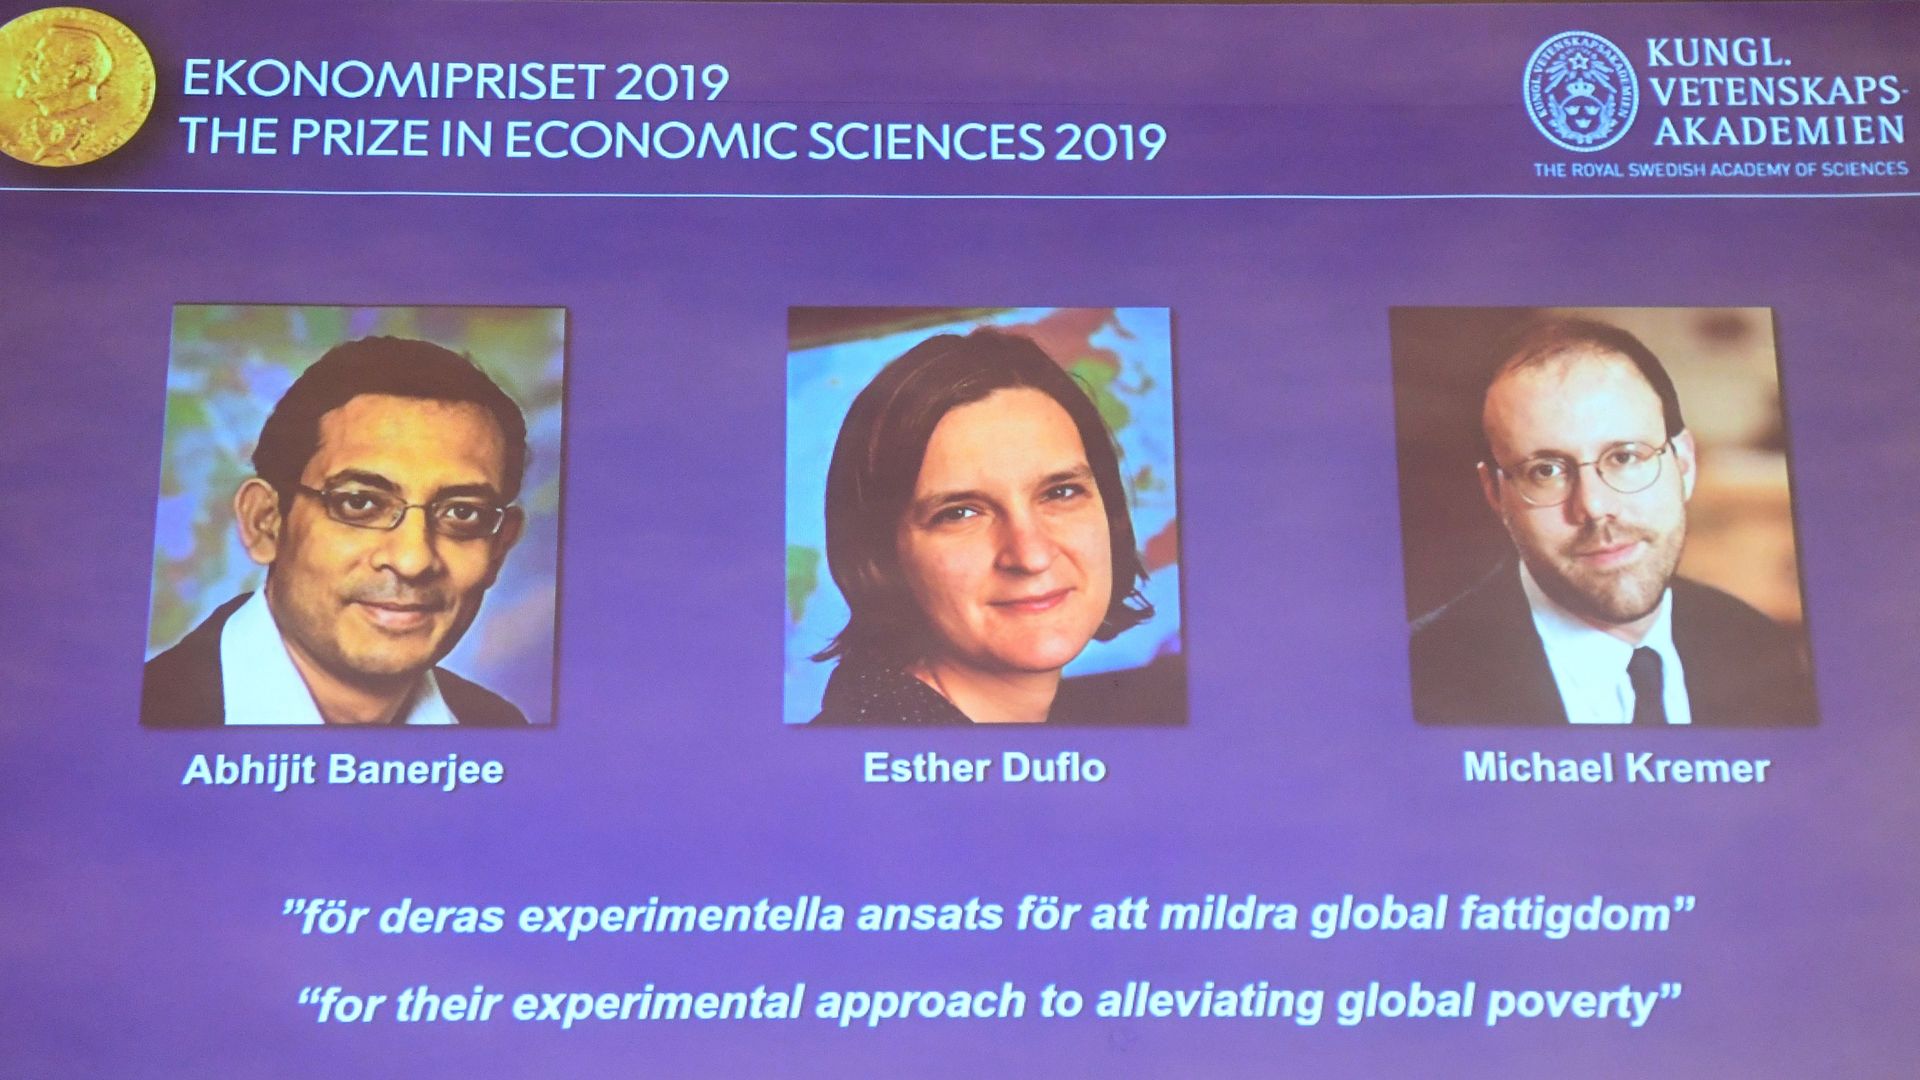 The winners of the 2019 Nobel prize in economic science.